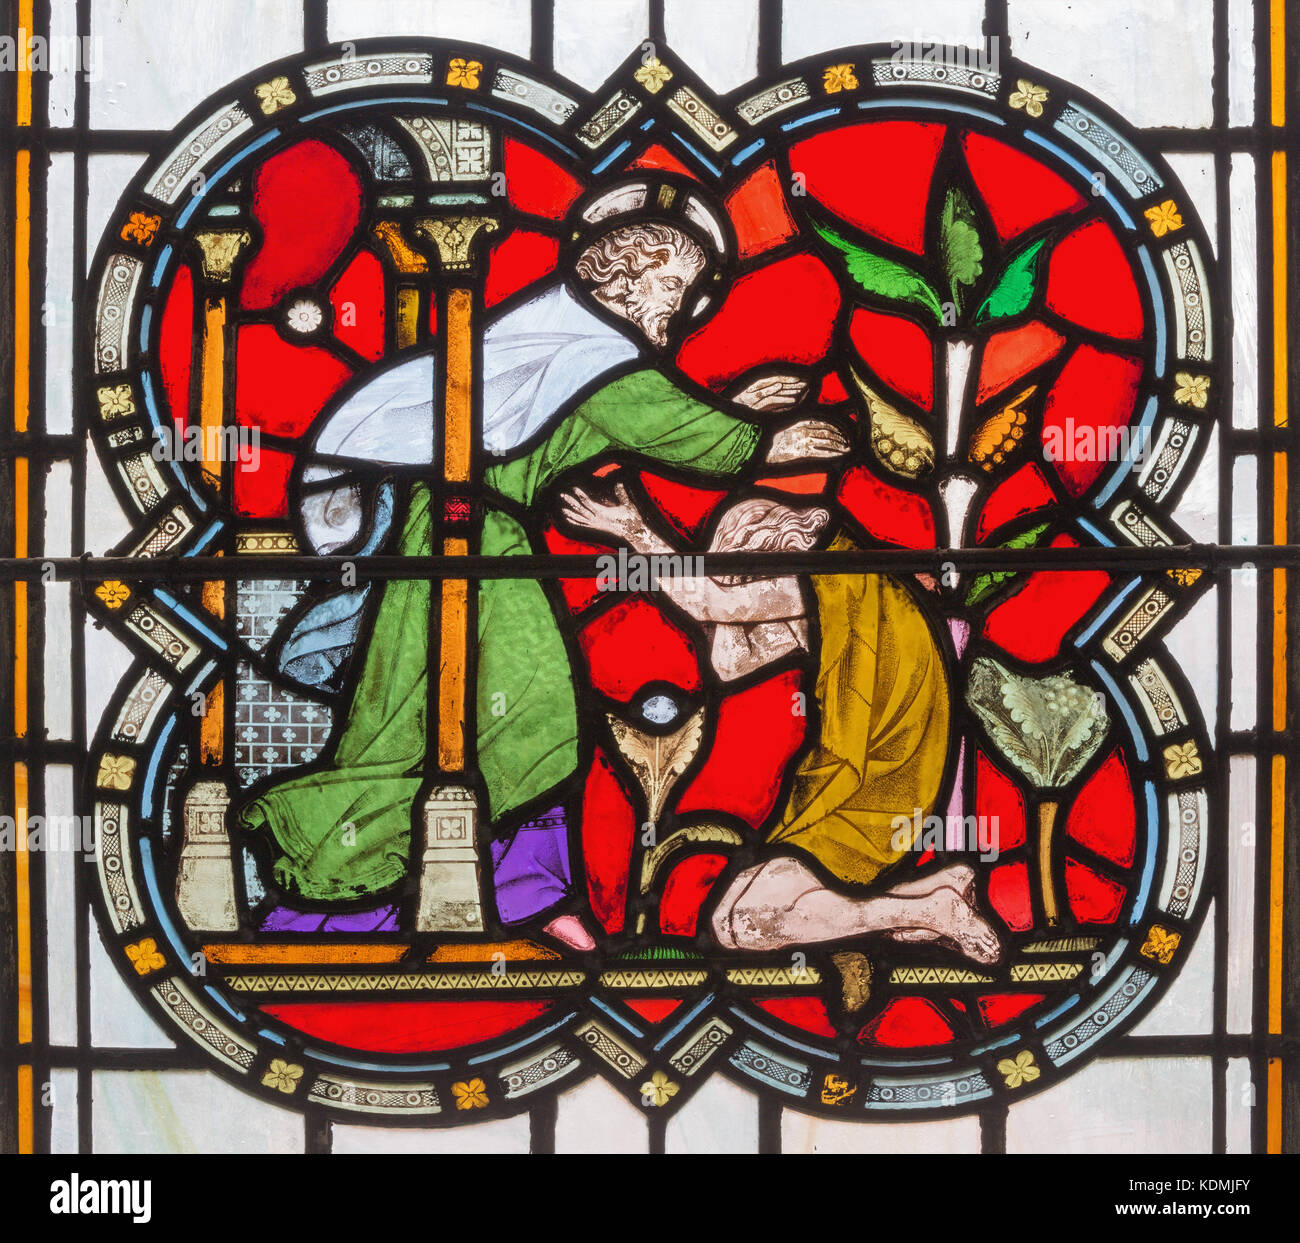 LONDON, GREAT BRITAIN - SEPTEMBER 14, 2017: The parable of Prodigal son on the stained glass in the church St. Michael Cornhill by Clayton and Bell. Stock Photo